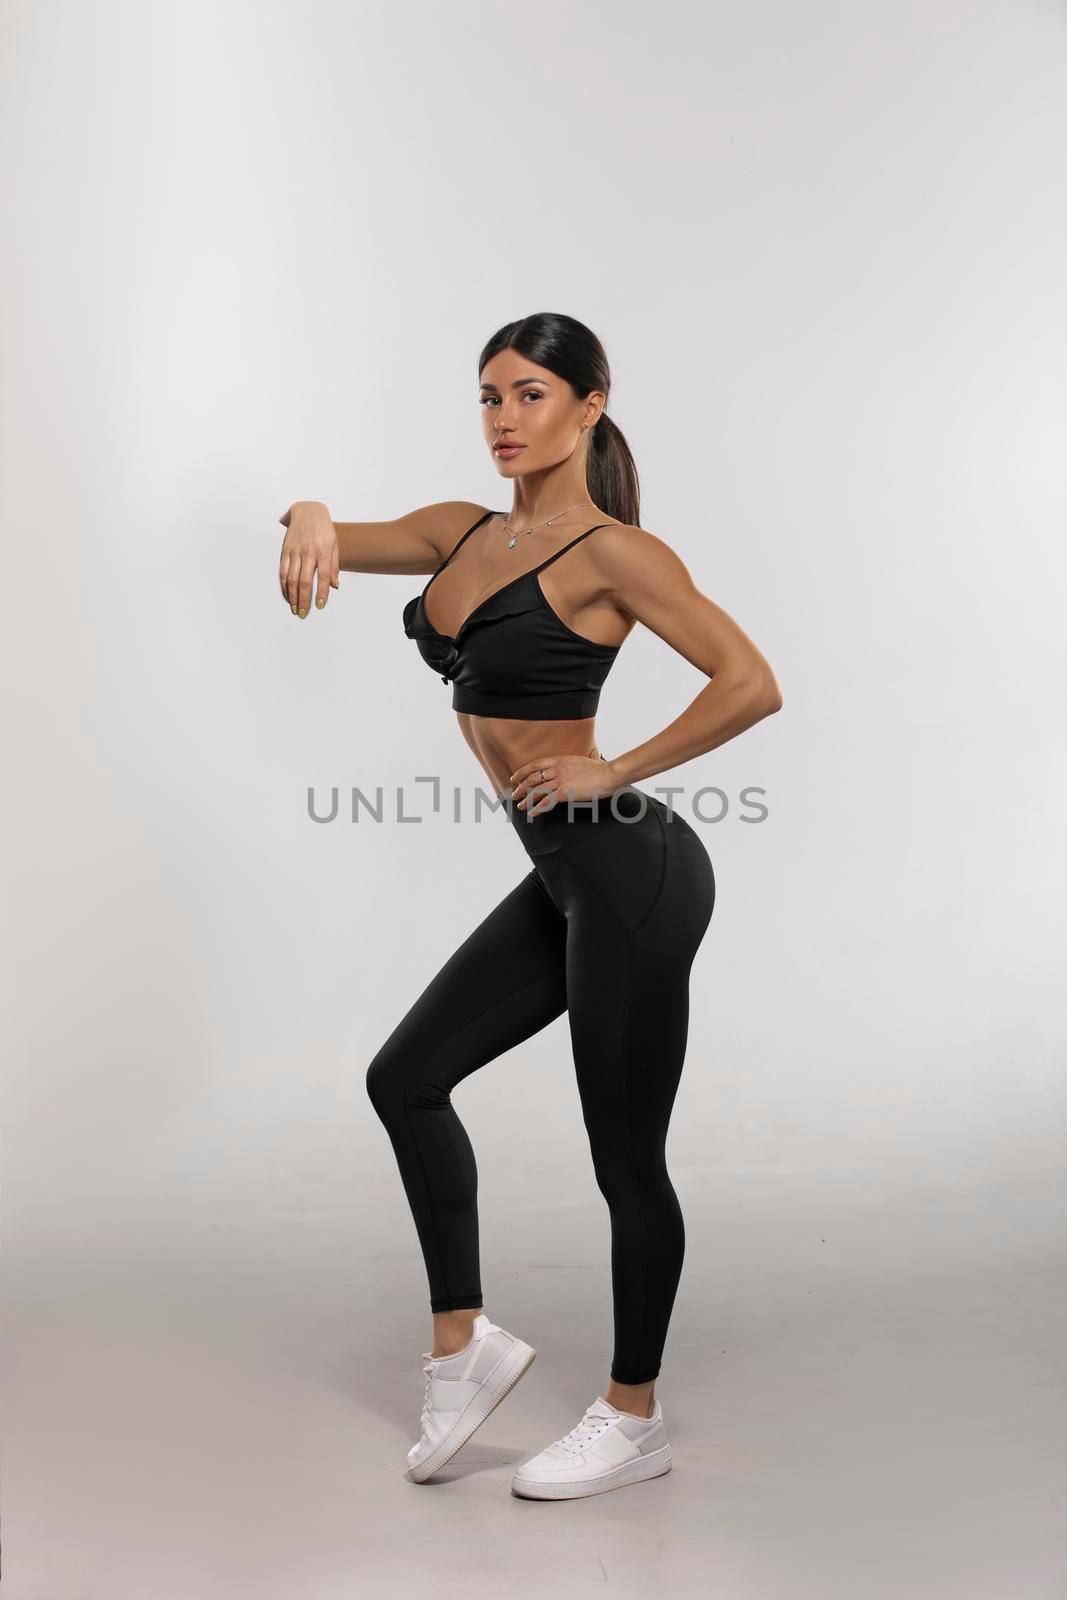 brunette girl in black leggings and a top on a white background